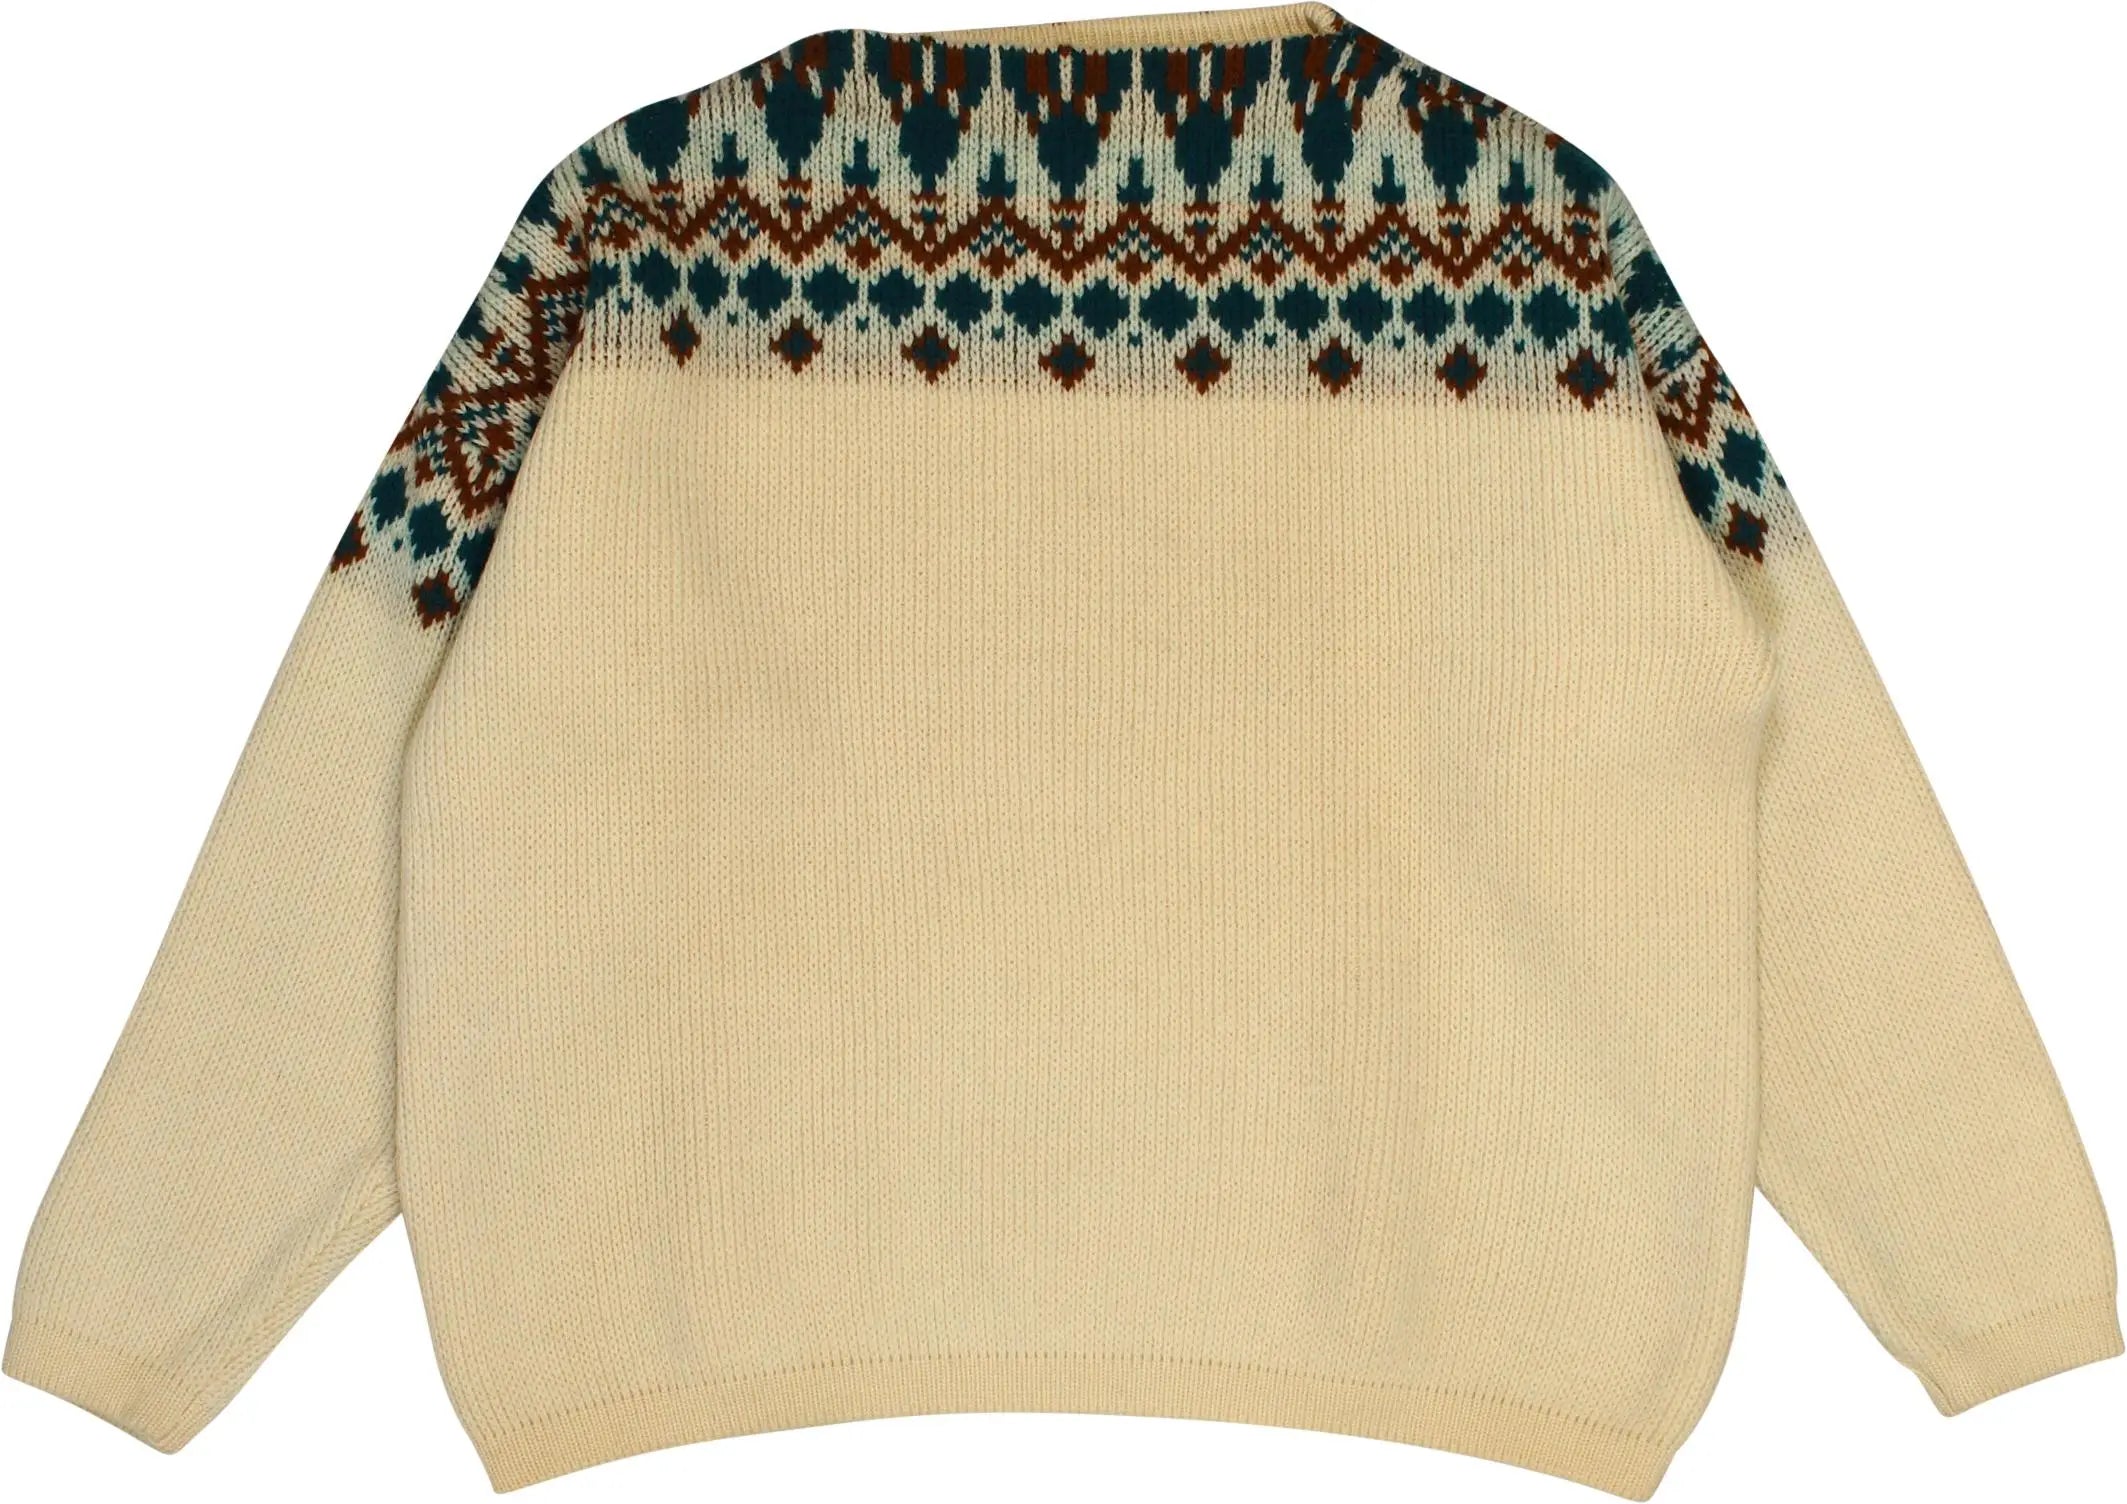 Unknown - Cream Patterned Jumper- ThriftTale.com - Vintage and second handclothing